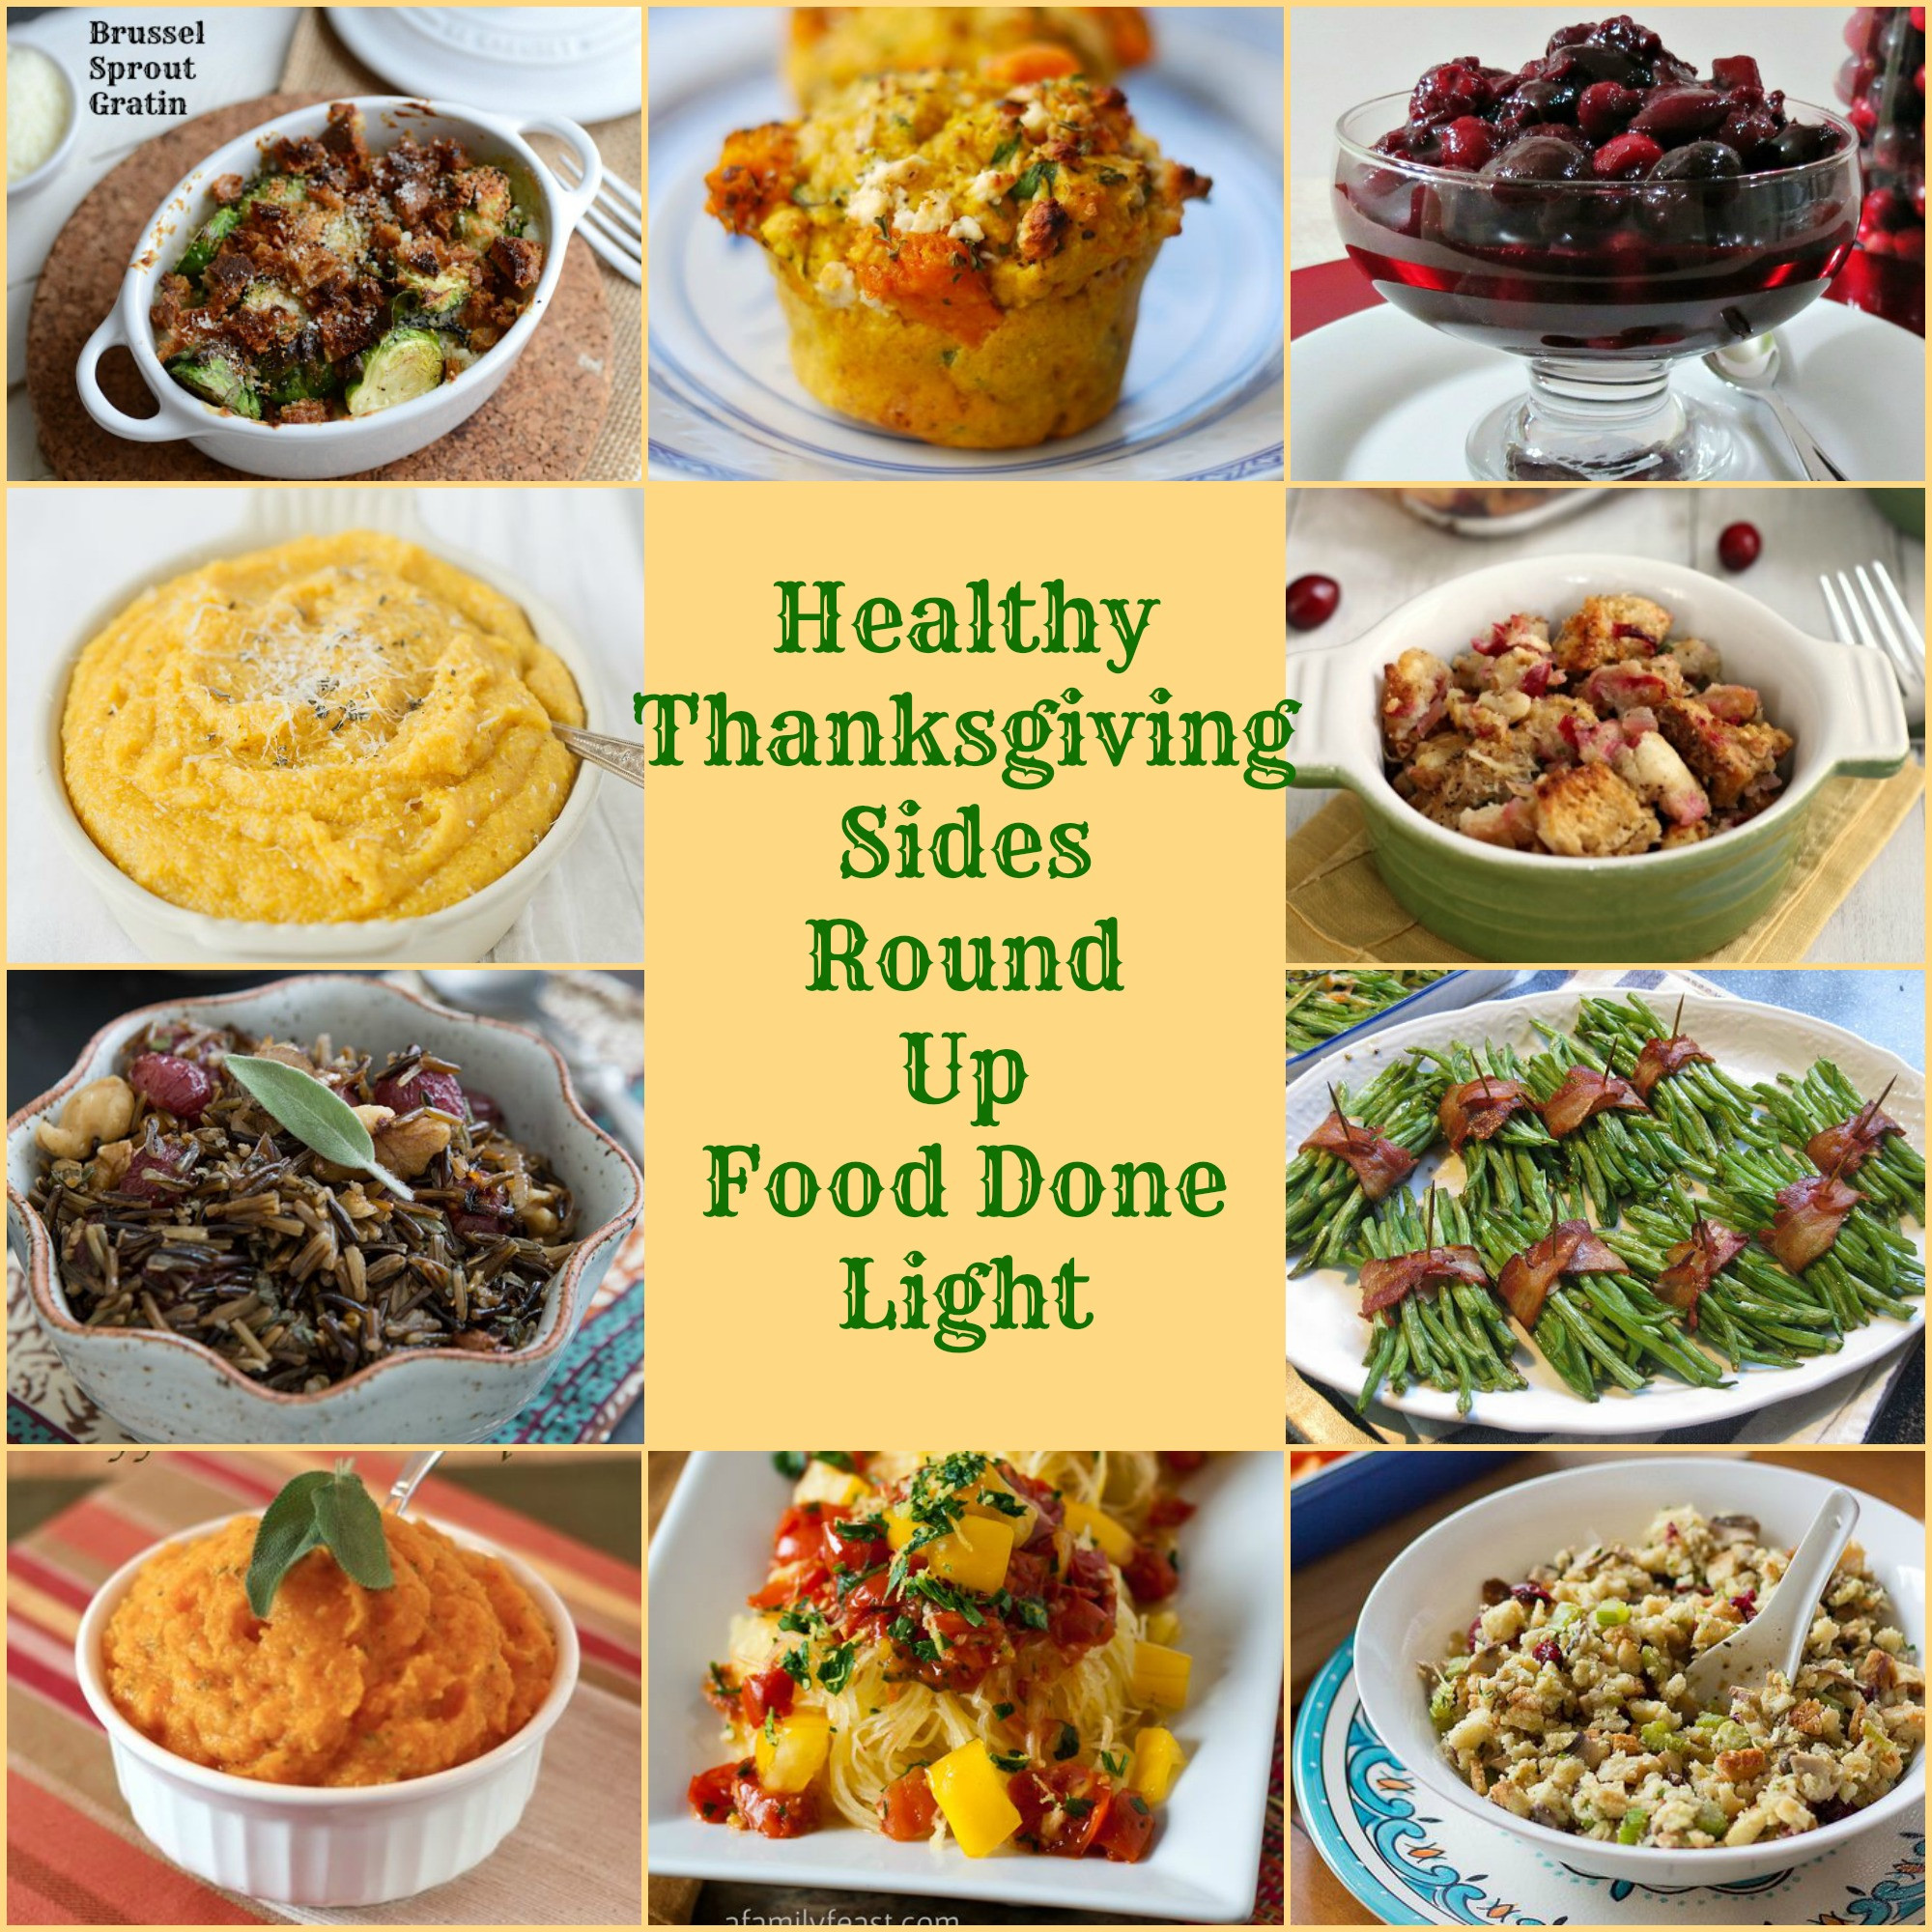 Thanksgiving Dinner Sides
 Healthy Thanksgiving Sides Recipe Round Up Food Done Light